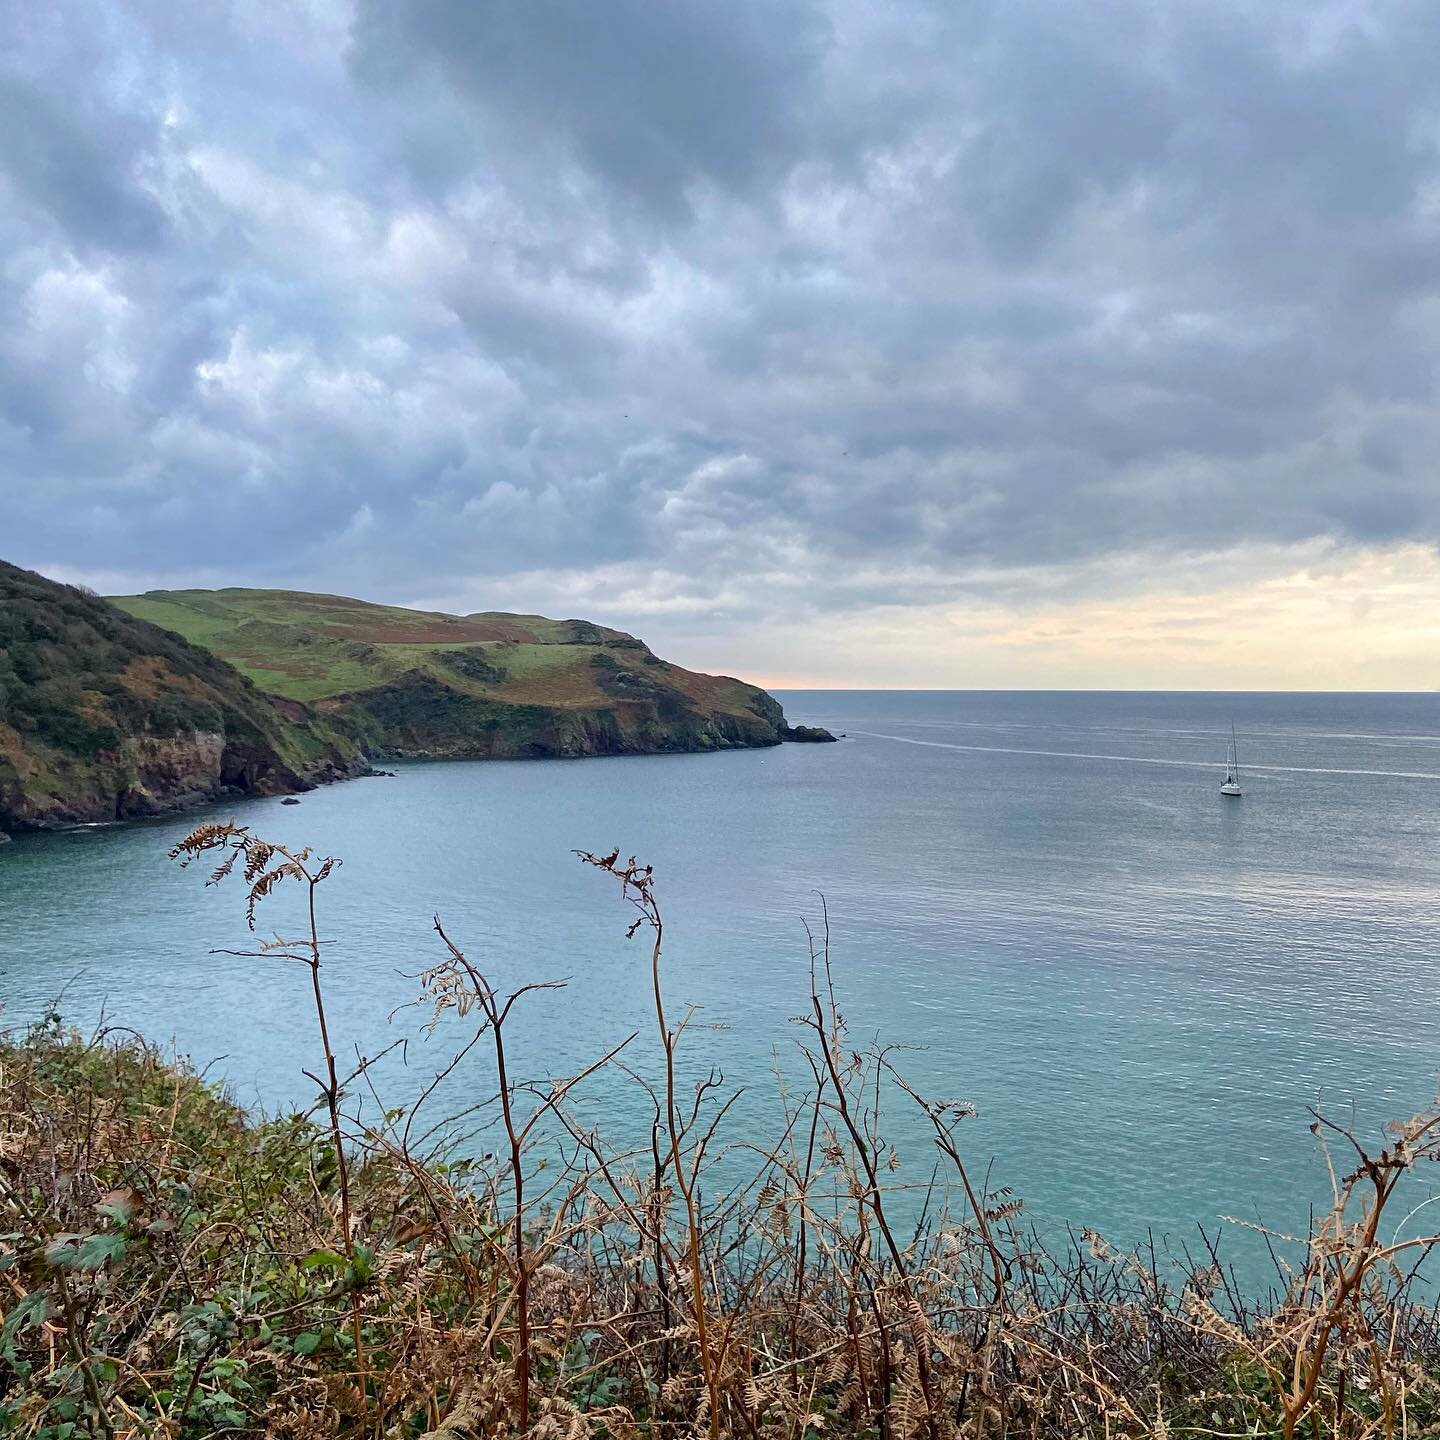 Last week, I ventured down to Devon, exploring Salcombe and Hope Cove. It was the first week I&rsquo;ve taken off since February and it felt amazing to get away.  I had forgotten just how much I had missed the ocean and exploring new places.

Even th